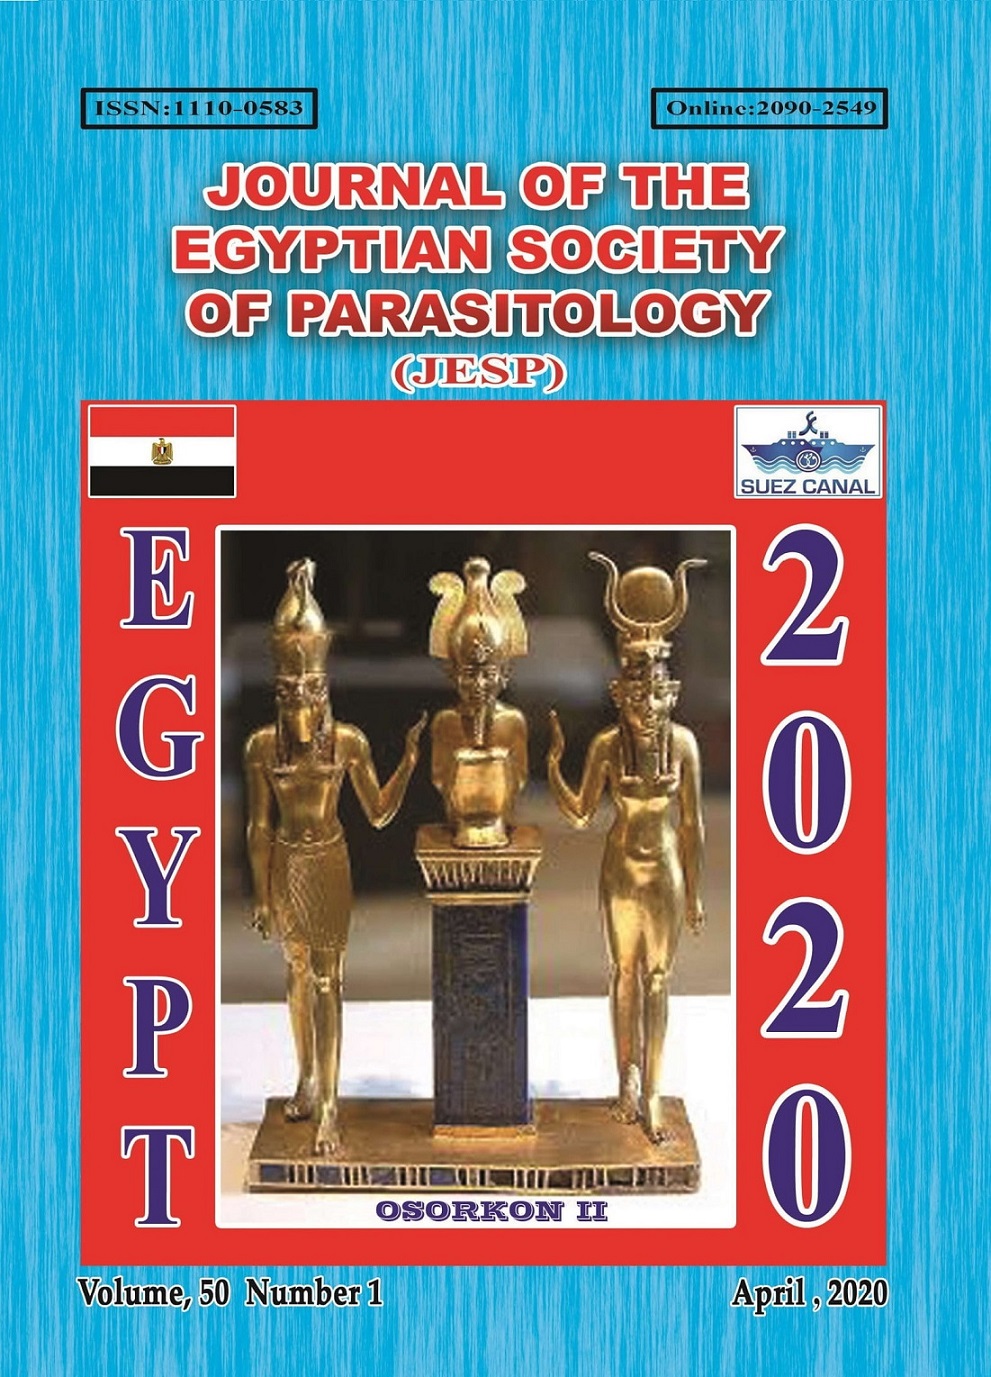 Journal of the Egyptian Society of Parasitology